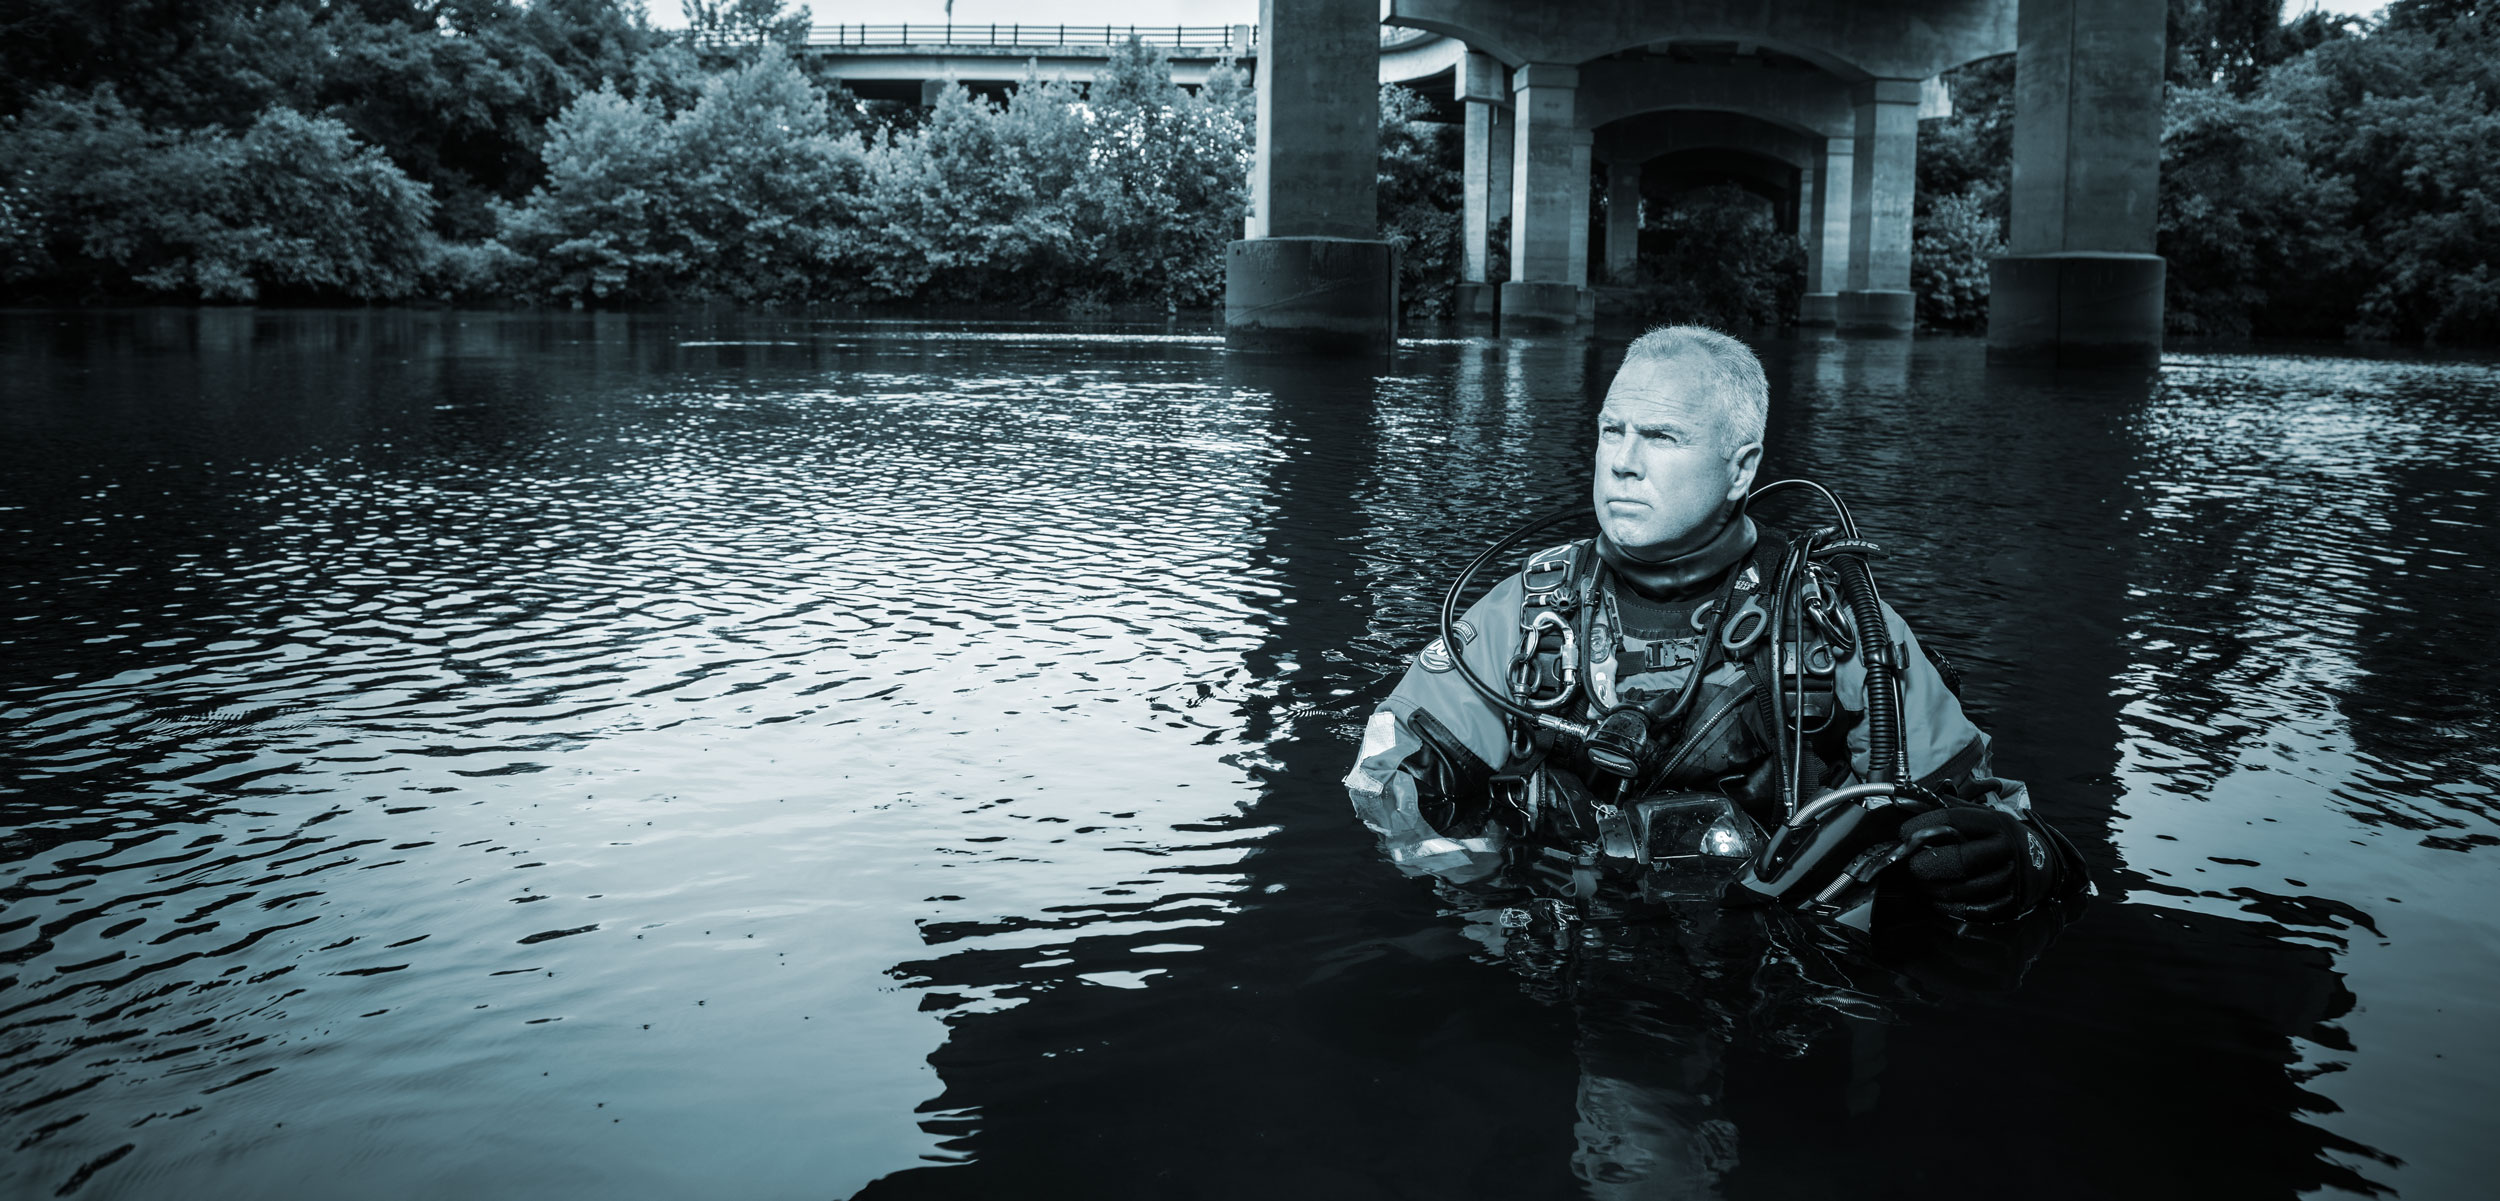 Underwater Investigator Mike Berry poses in a river under a bridge